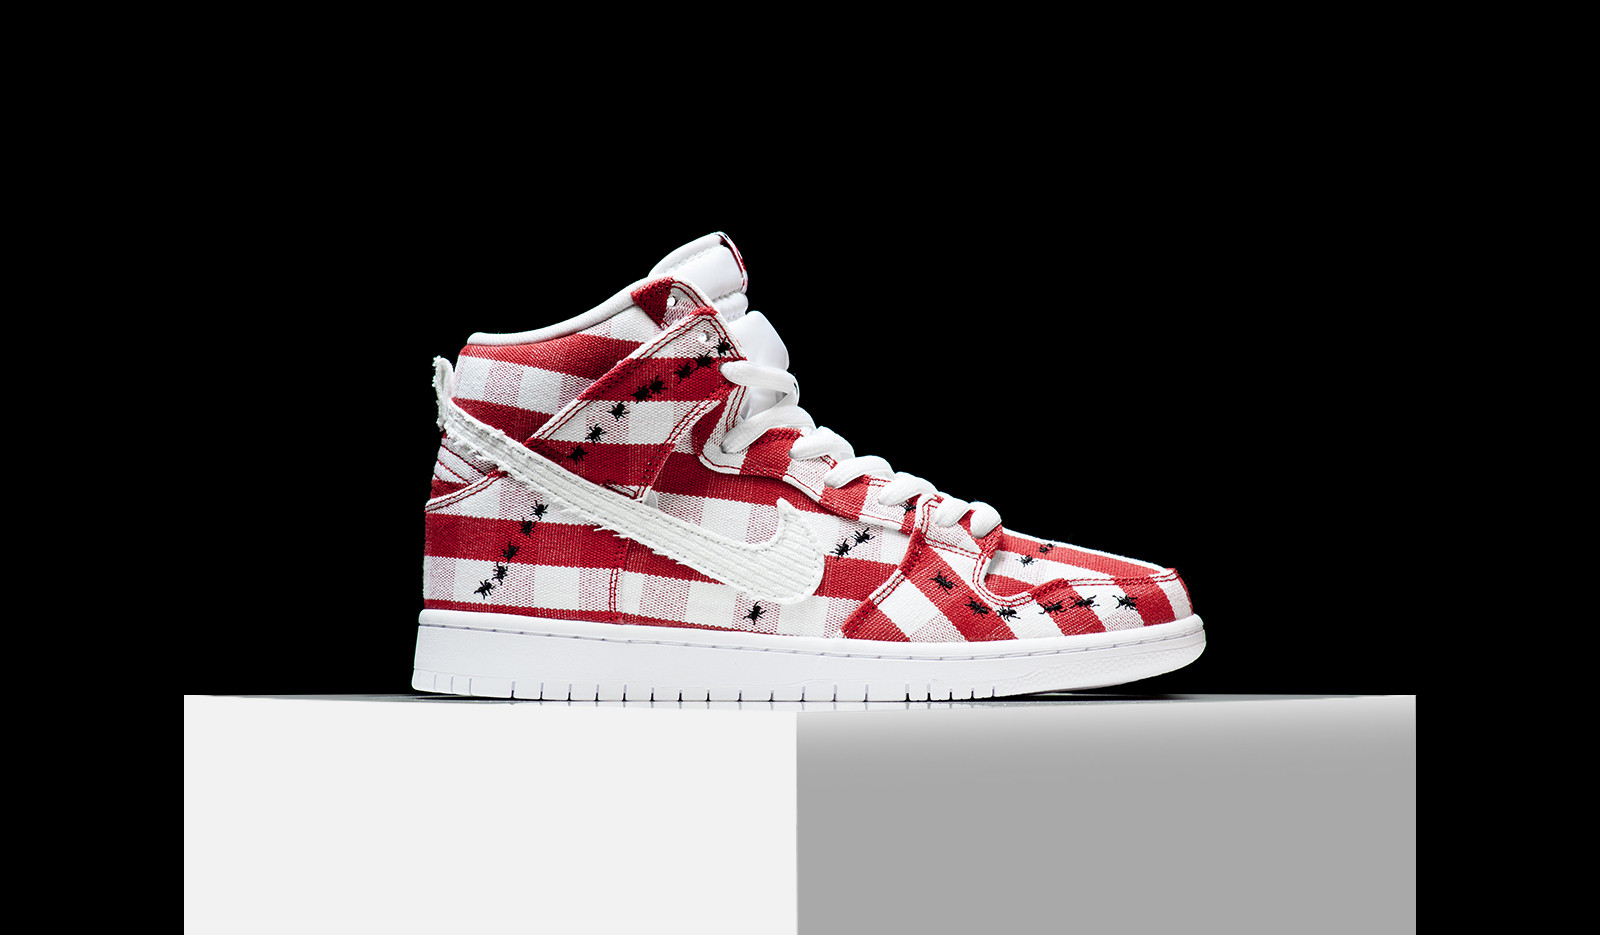 Now Available: Nike SB Dunk High Pro 